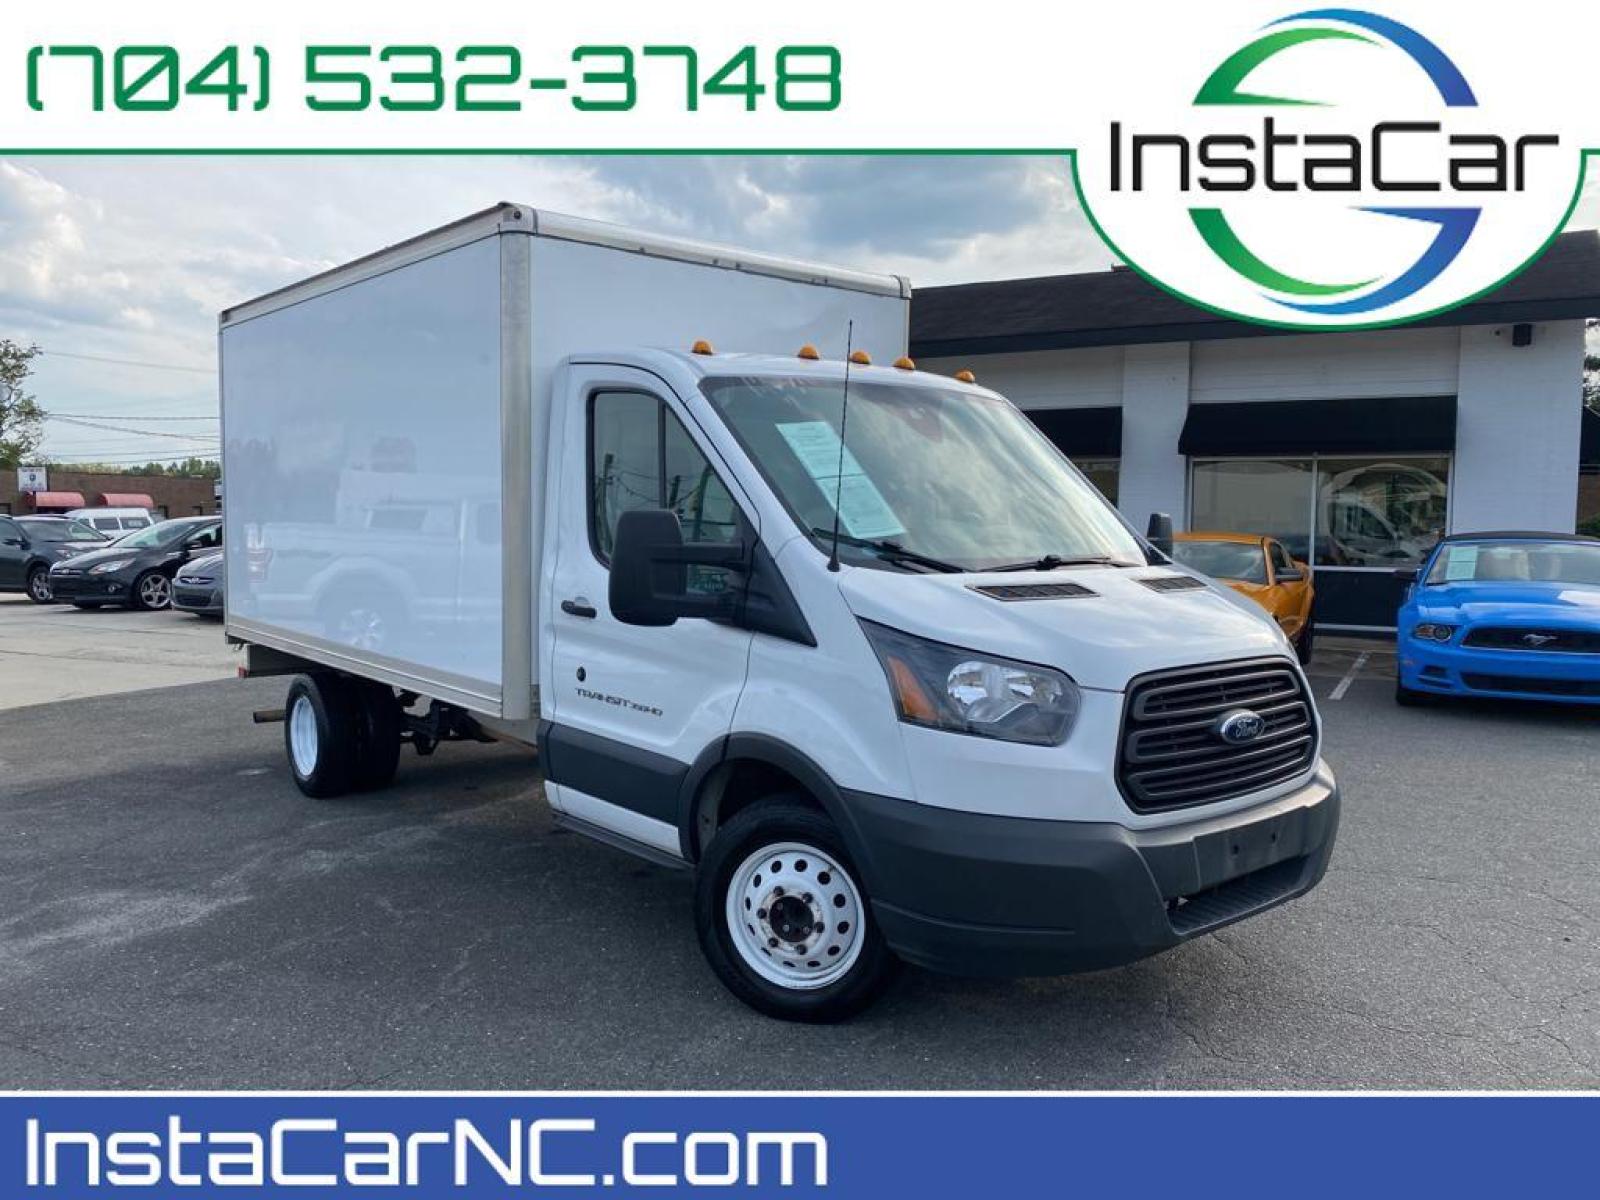 2018 Oxford White /Pewter Ford Transit Chassis Cab Base (1FDBF8ZM1JK) with an V6, 3.7L engine, 6-speed automatic transmission, located at 3147 E Independence Blvd, Charlotte, NC, 28205, 35.200268, -80.773651 - <b>Equipment</b><br>This model features a hands-free Bluetooth phone system. See what's behind you with the back up camera on this vehicle. This vehicle is a certified CARFAX 1-owner. It is rear wheel drive. This vehicle has a V6, 3.7L high output engine. This 1 ton van embodies class and sophistica - Photo #0